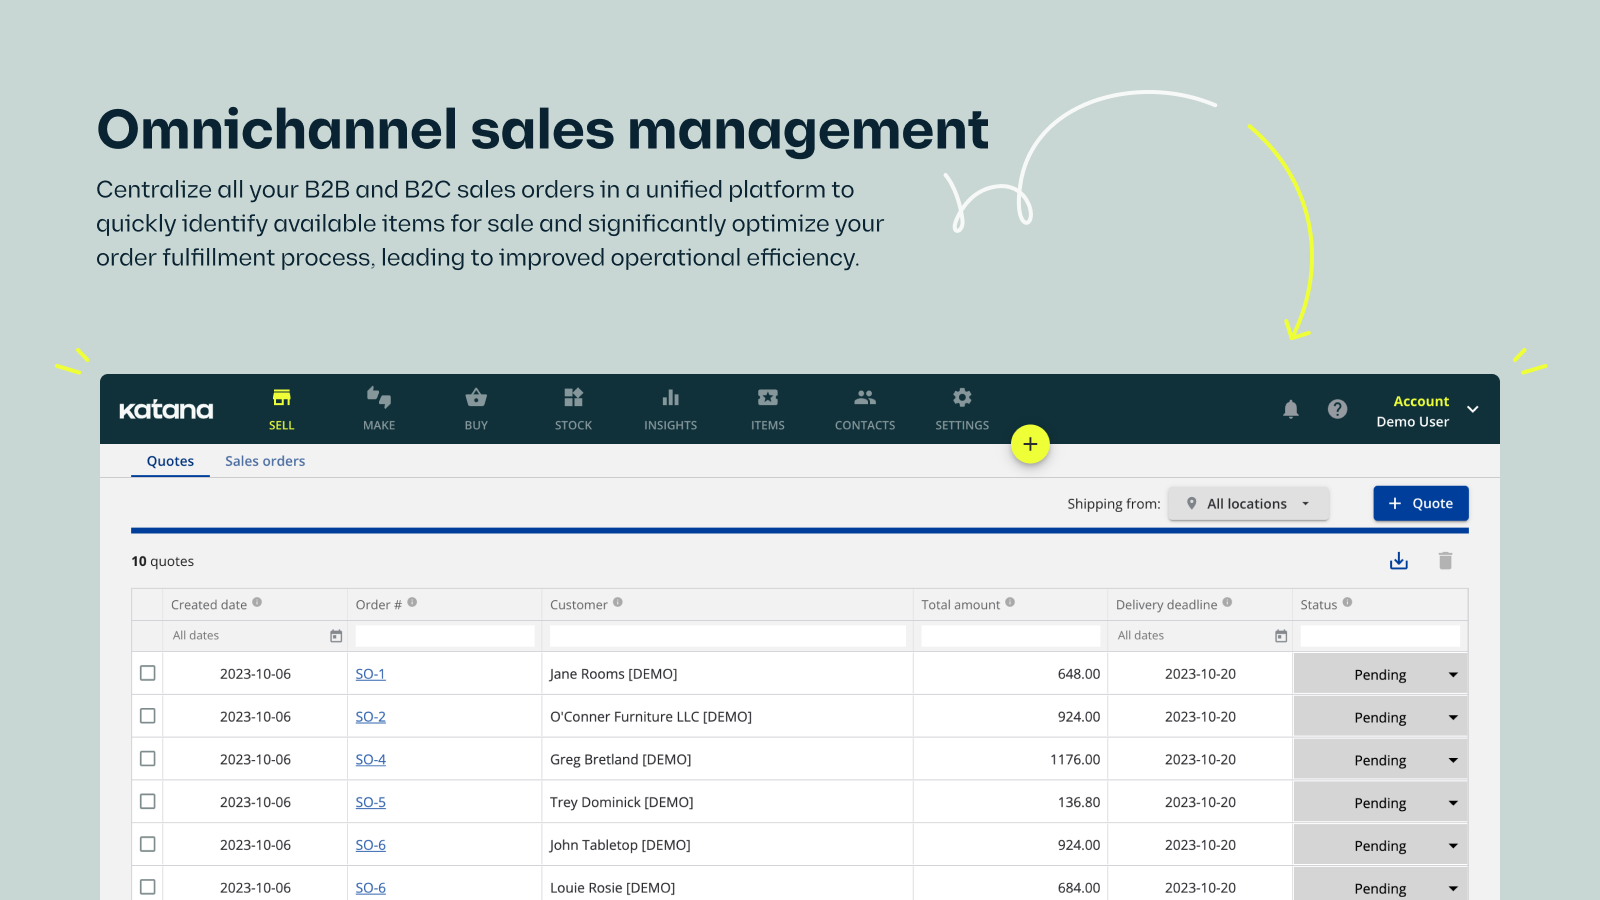 Omnichannel sales management to optimize your order fulfillment